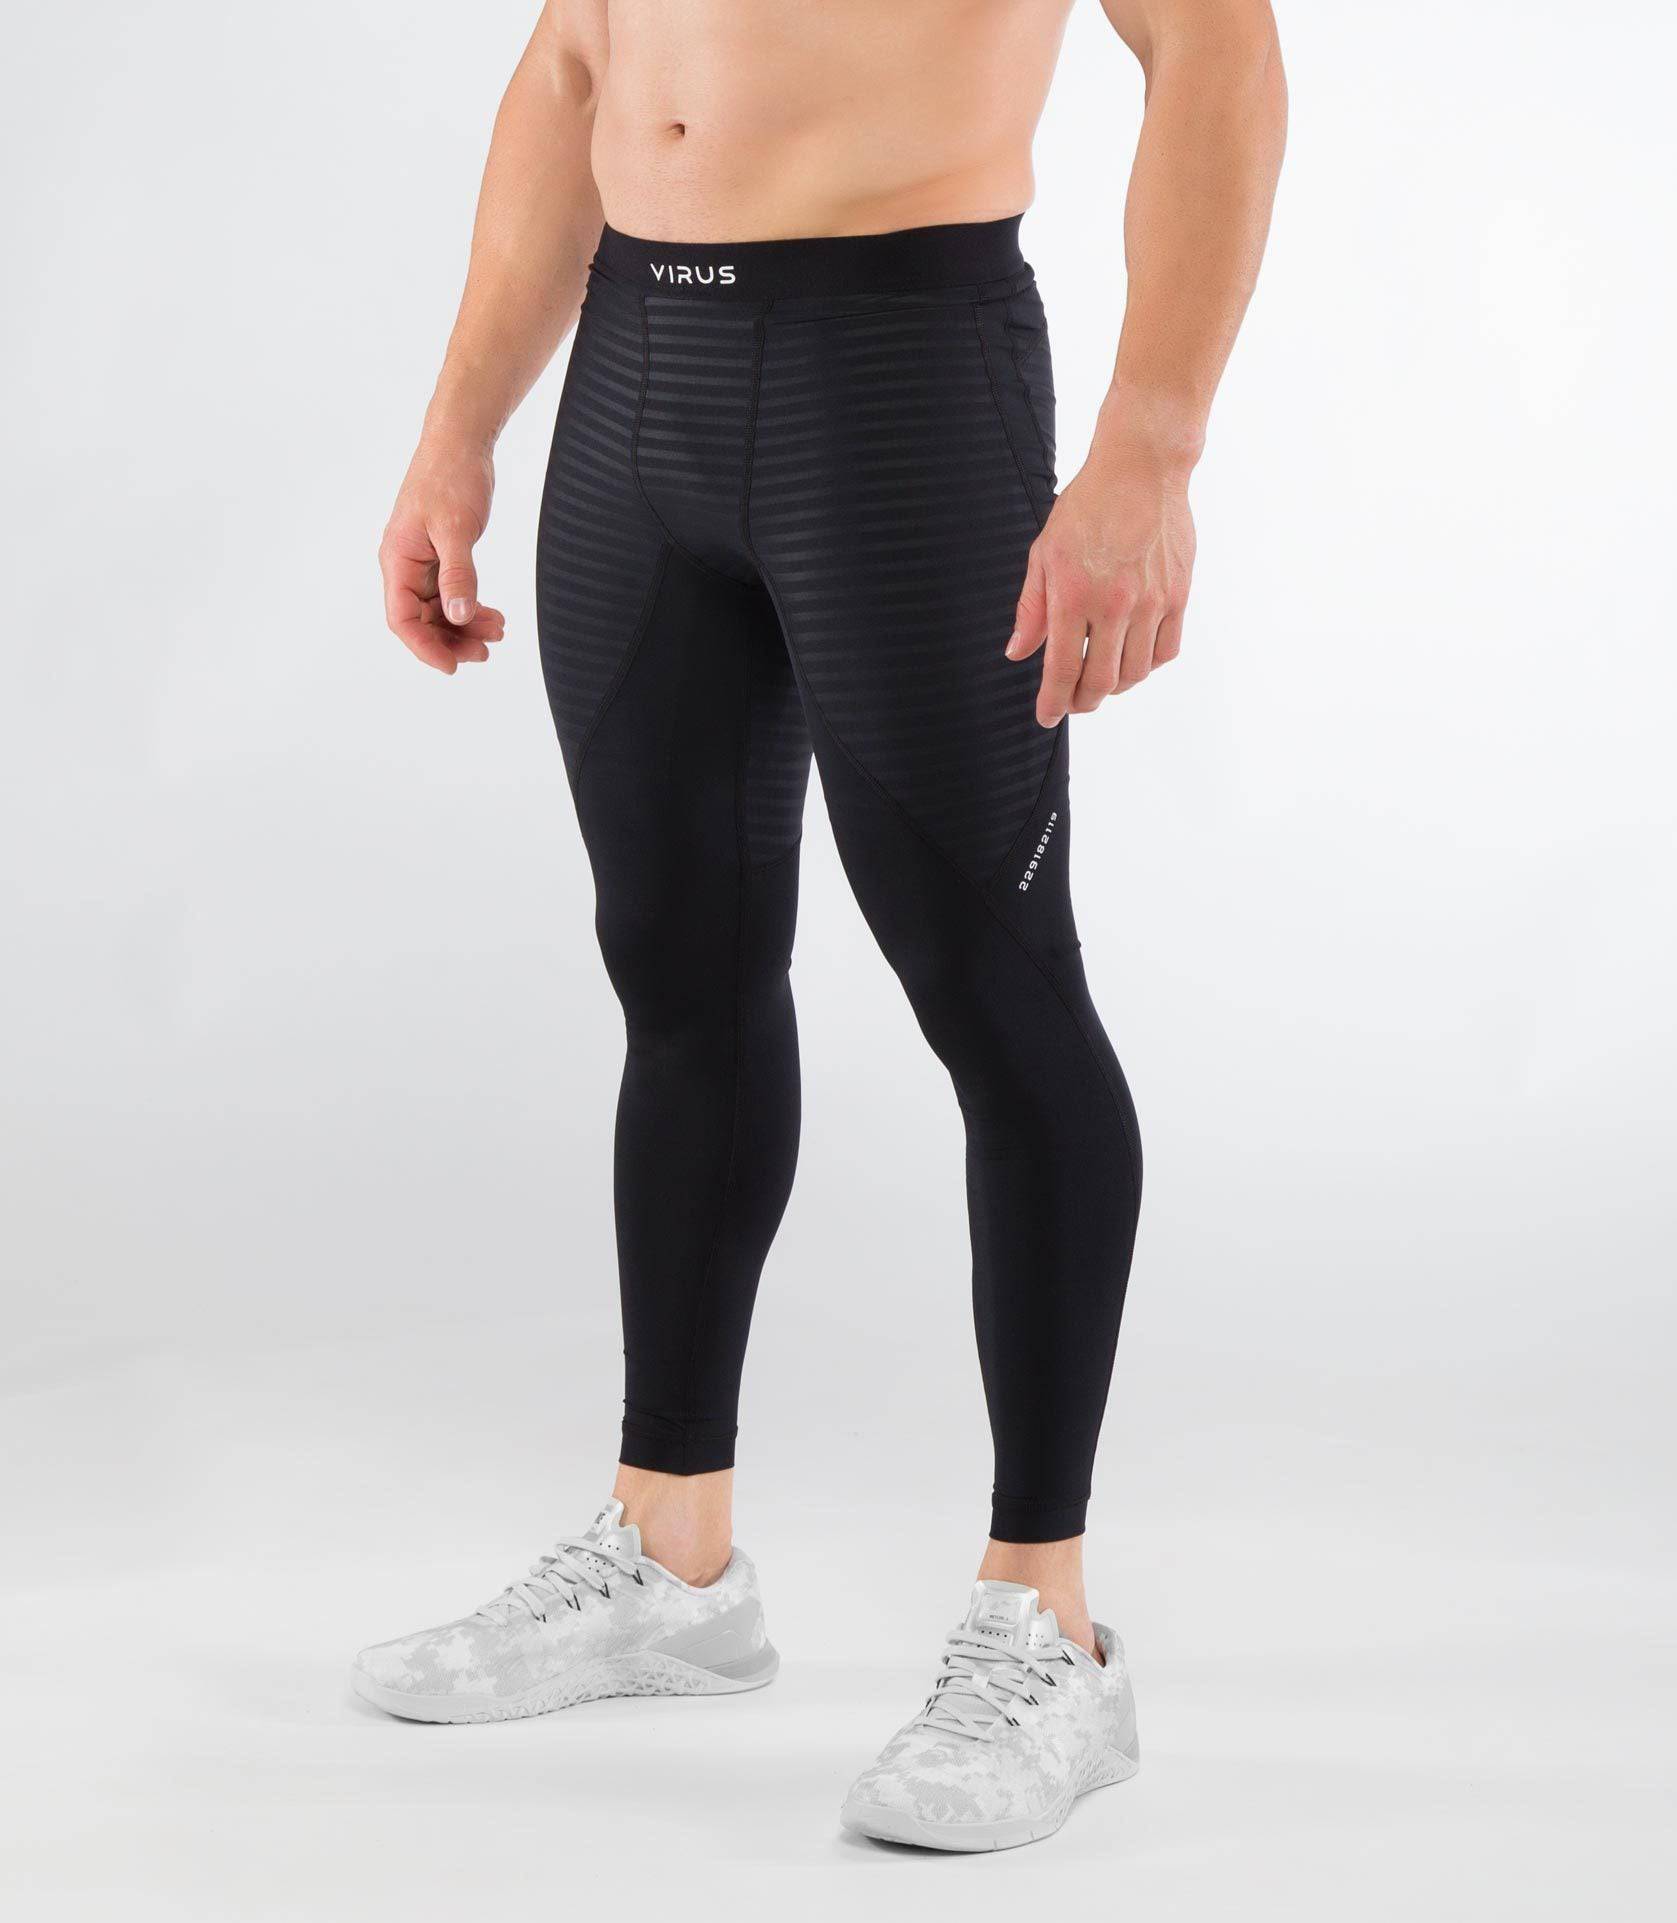 Virus | CO38 Align Stay Cool Compression Pants - XTC Fitness - Exercise Equipment Superstore - Canada - Pants